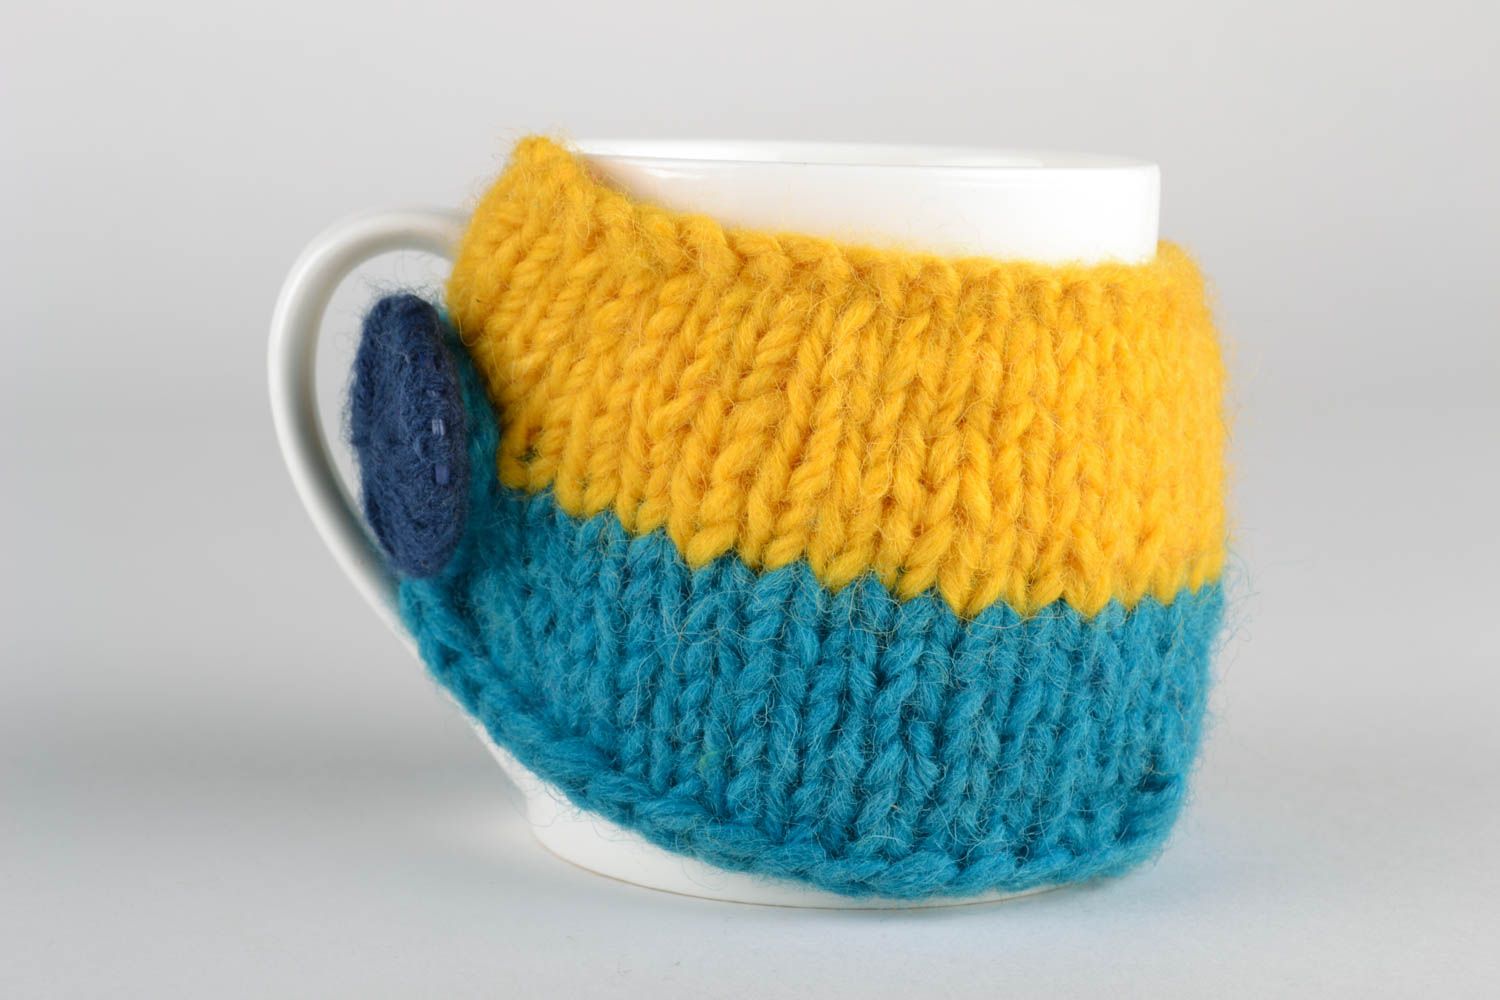 Glass cup in knitted sweater photo 2